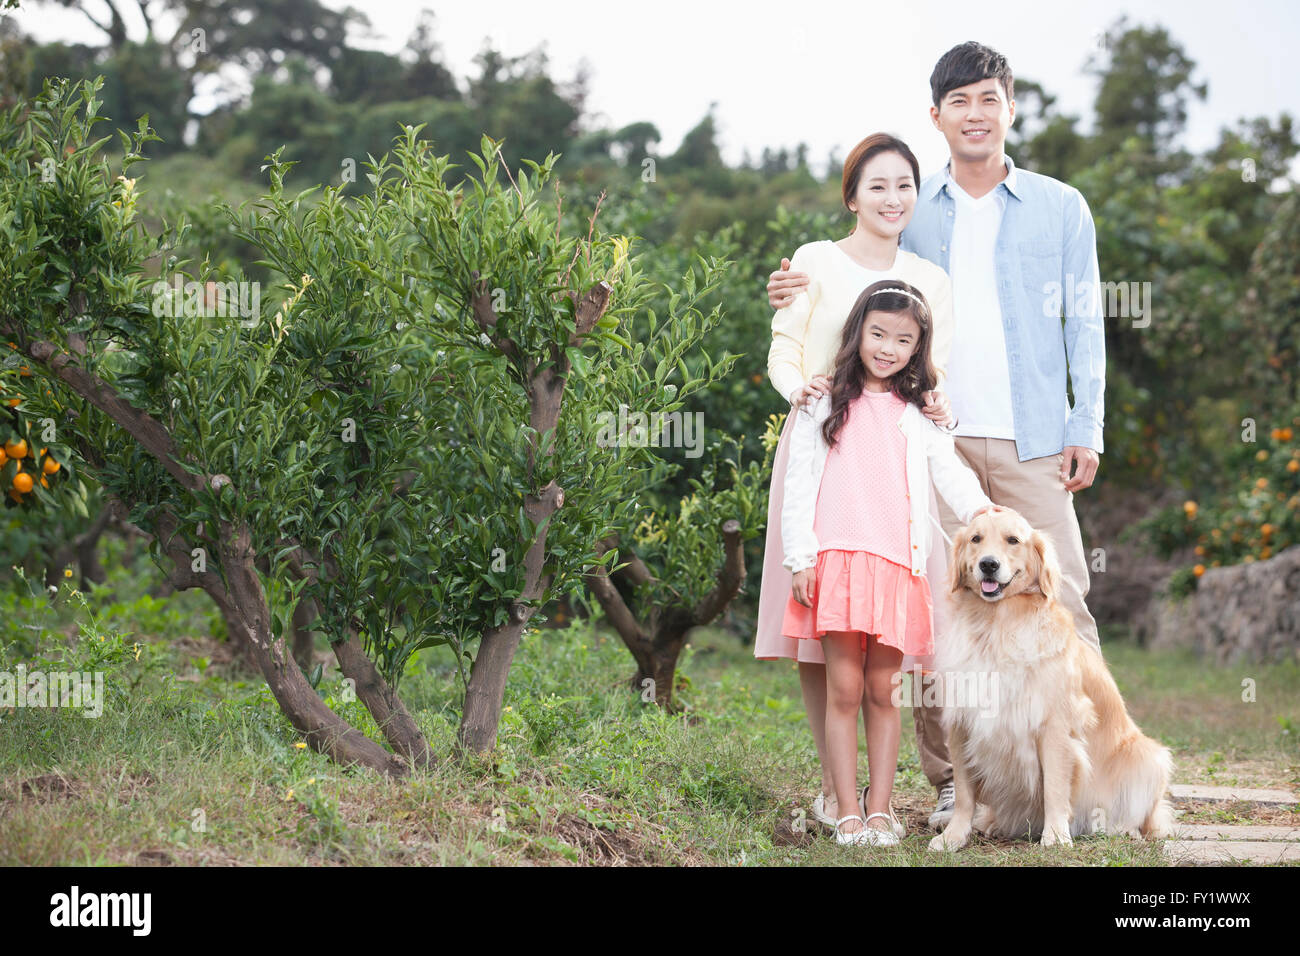 Family with a dog at the field representing rural life Stock Photo